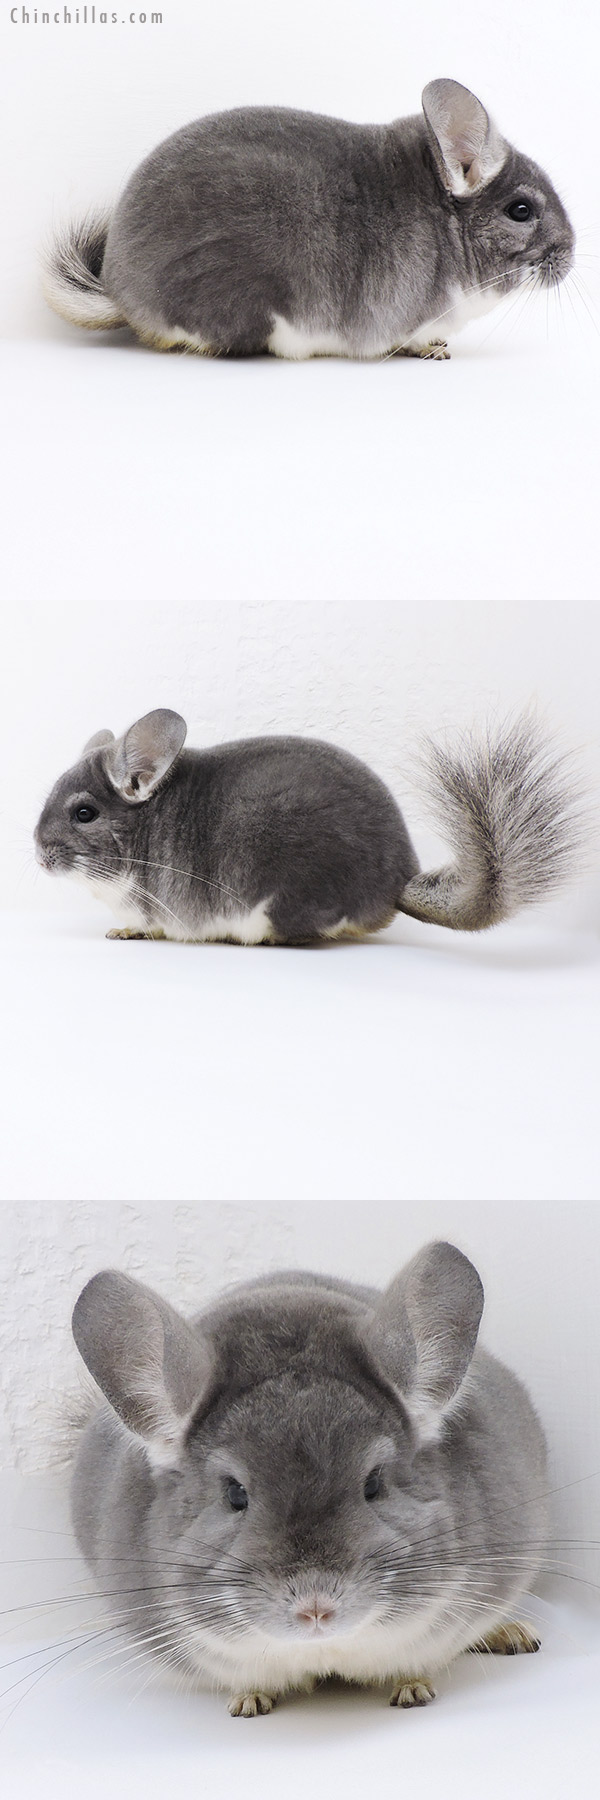 Chinchilla or related item offered for sale or export on Chinchillas.com - 19144 Extra Large Herd Improvement Quality Violet Male Chinchilla